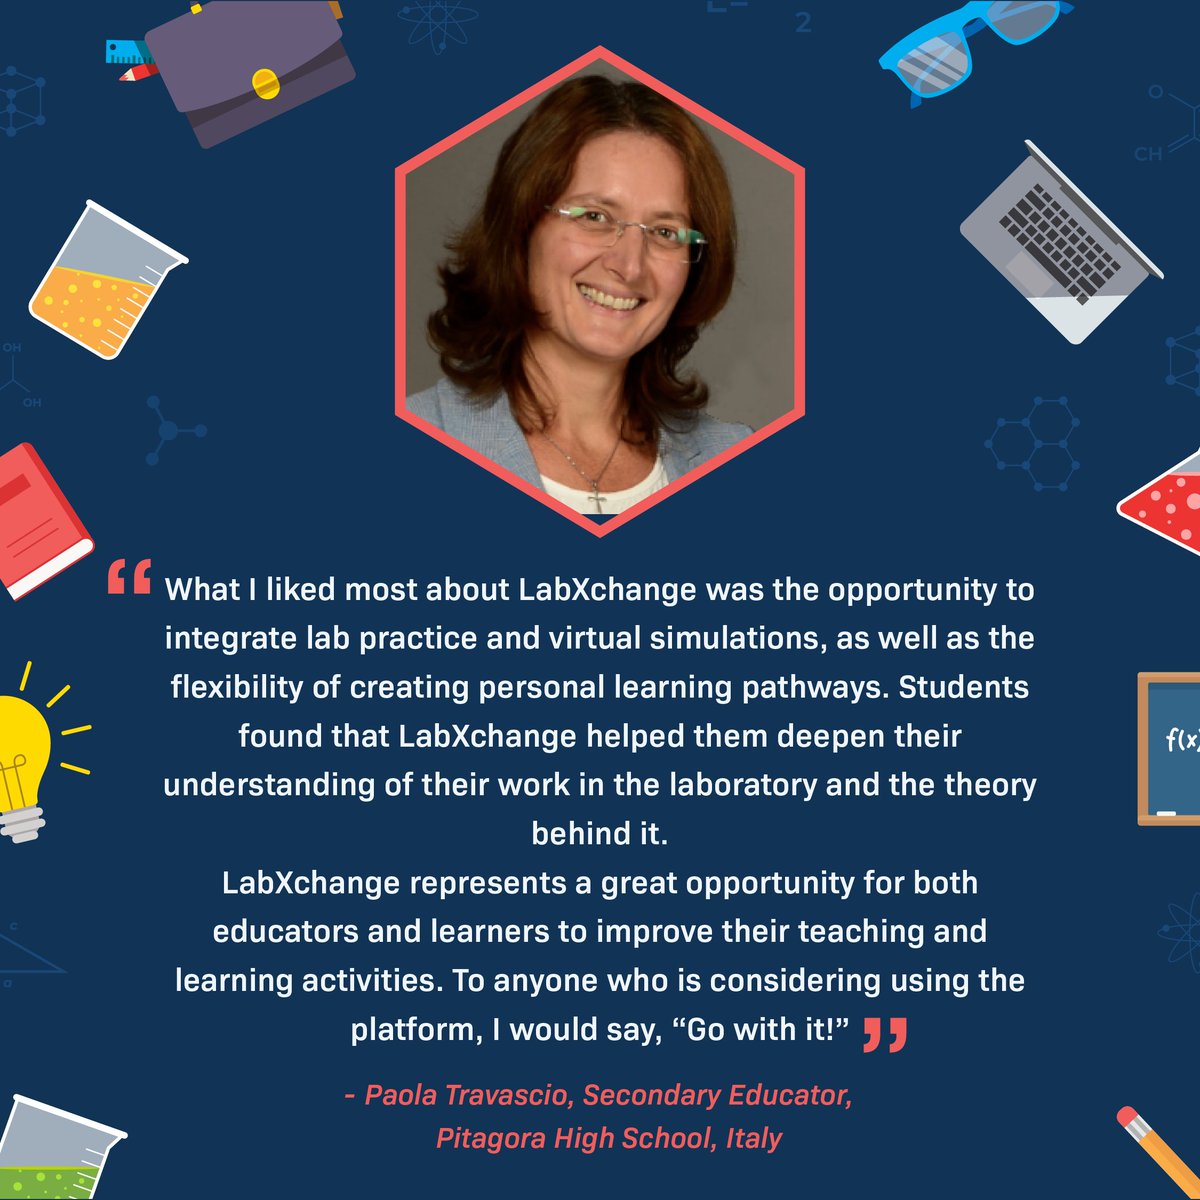 Join us in celebrating the remarkable insights shared by Paola Travascio, an educator from Pitagora High School in Italy. Paola's feedback is not only inspiring but also a testament to the transformative impact LabXchange has on teaching and learning. #FeedbackFriday #STEM